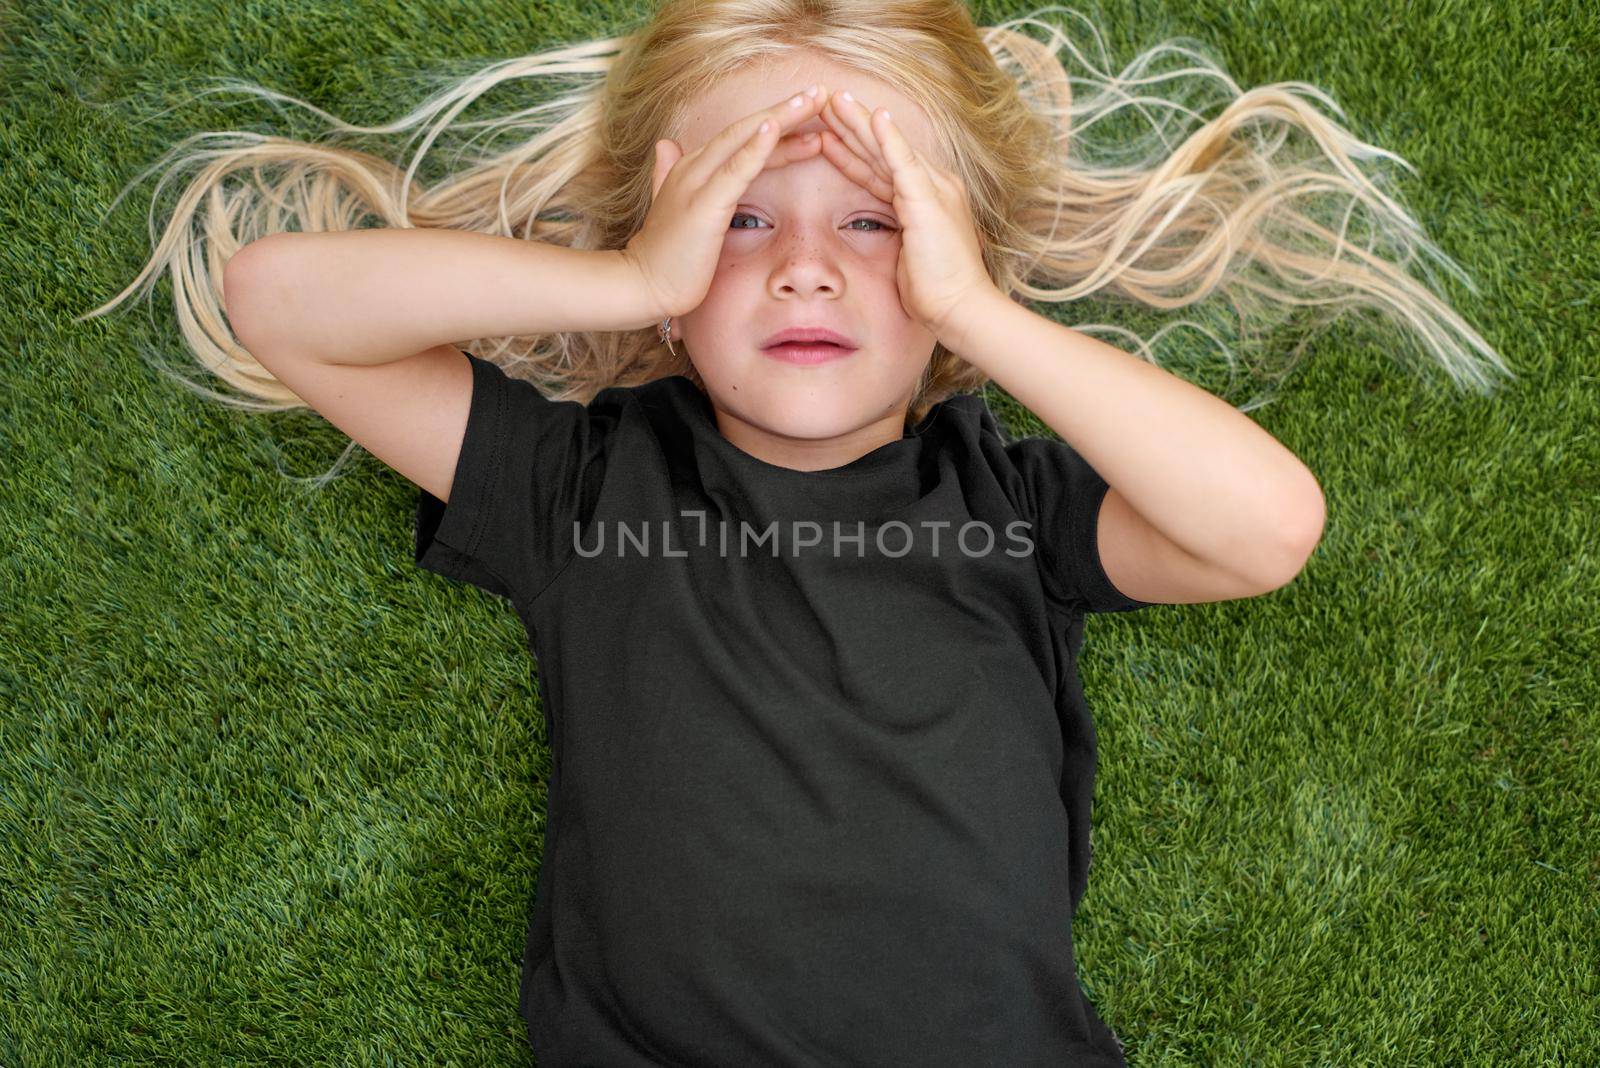 Top view. Mock up. Close up portrait blonde child girl with closed eyes lying, relaxing on green grass. Smiling preschool girl 5 - 6 years old in black t shirt. Lifestyle. Summer vacations. Leisure